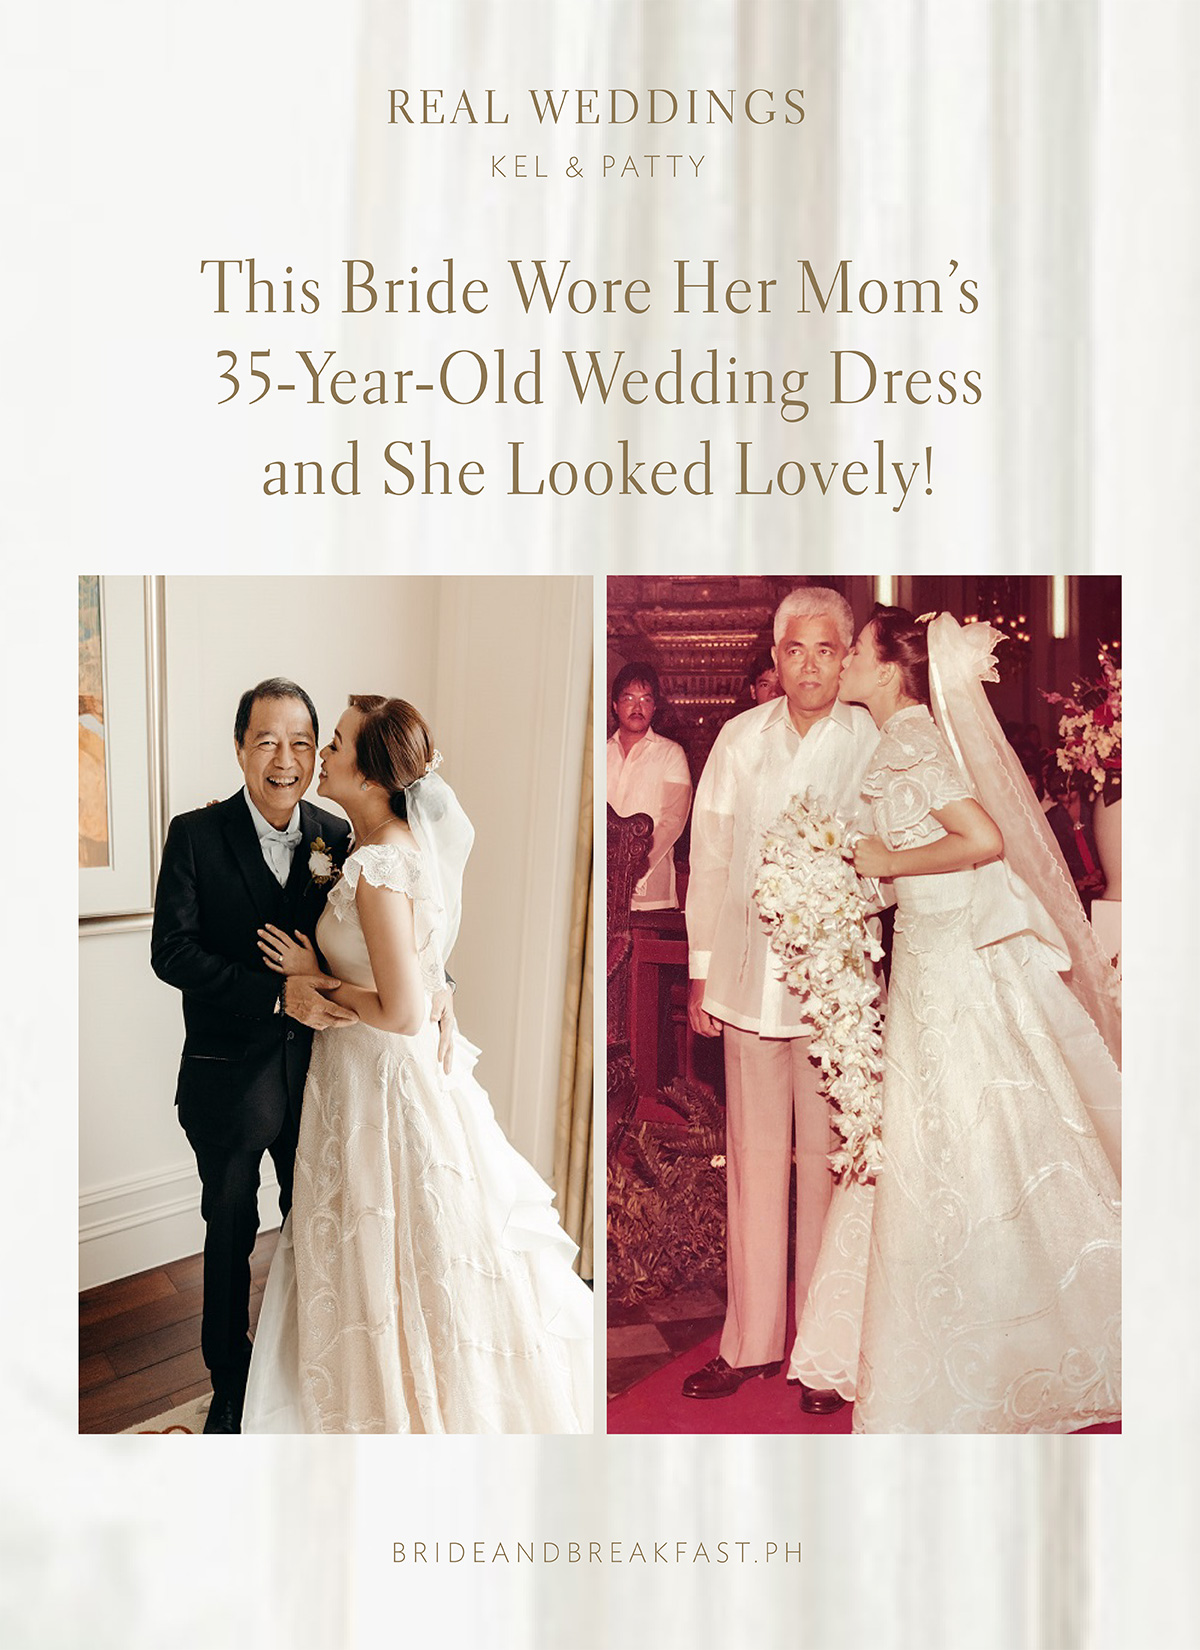 This Bride Wore Her Mom’s 35-Year-Old Wedding Dress and She Looked Lovely!